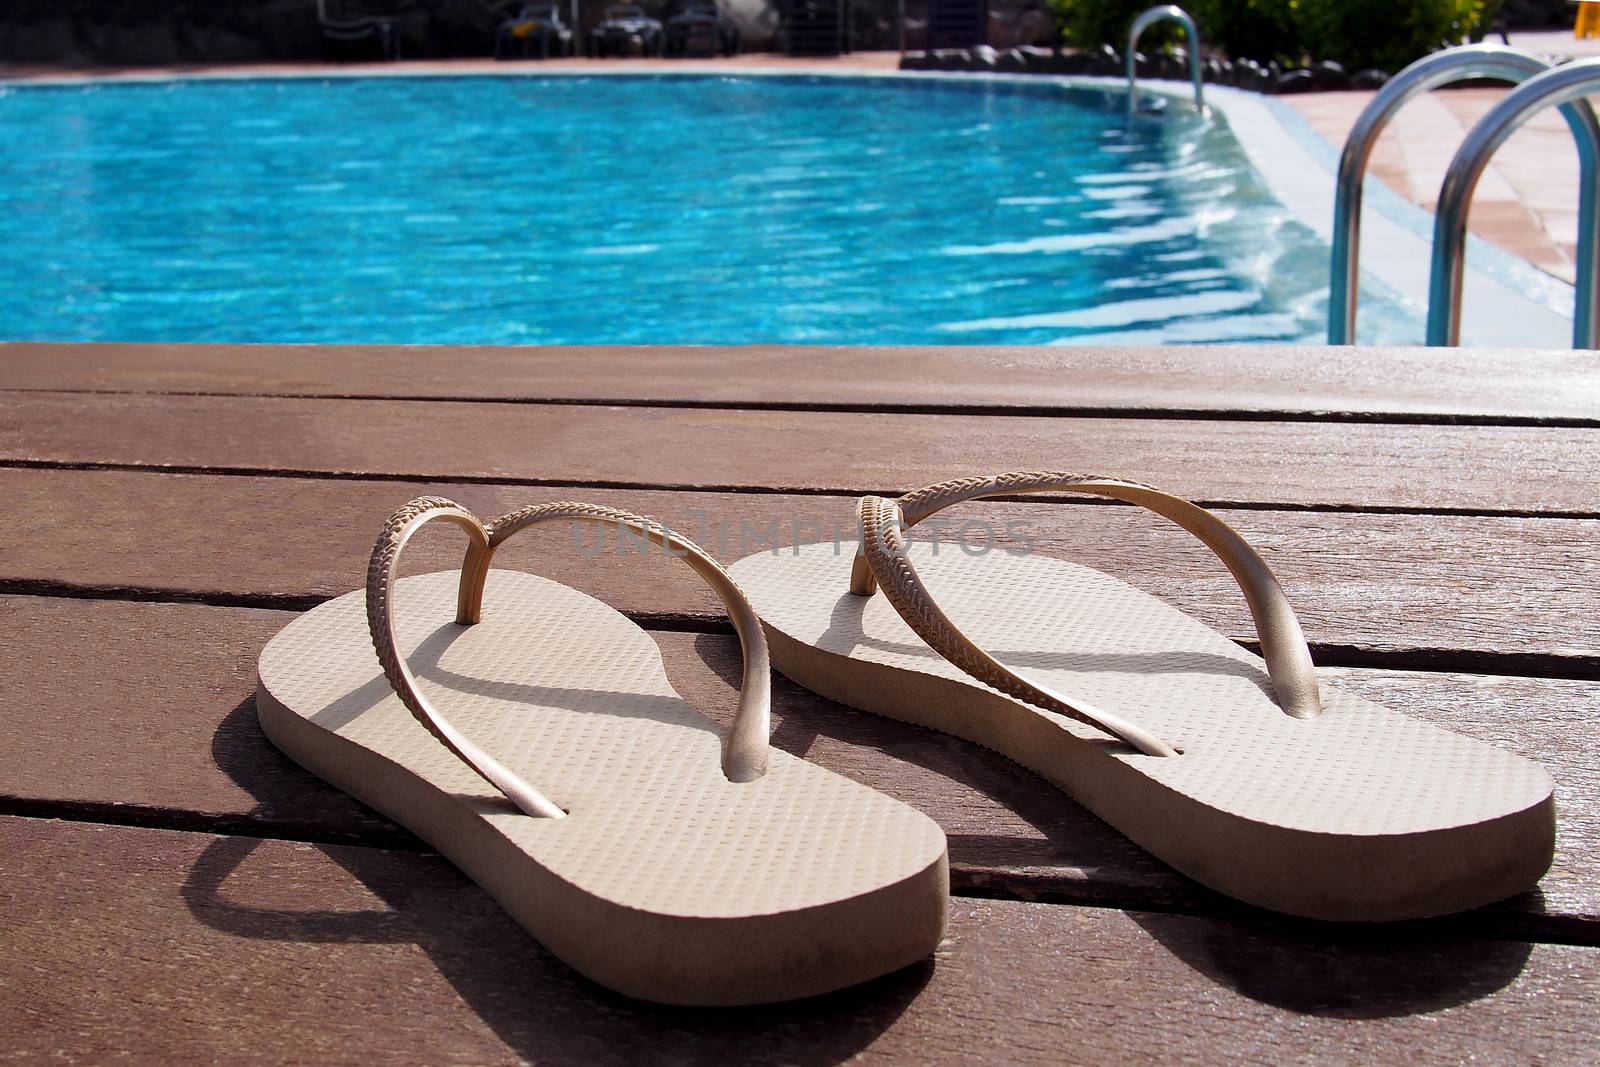 Pair of slippers by a swimming pool by stockyimages